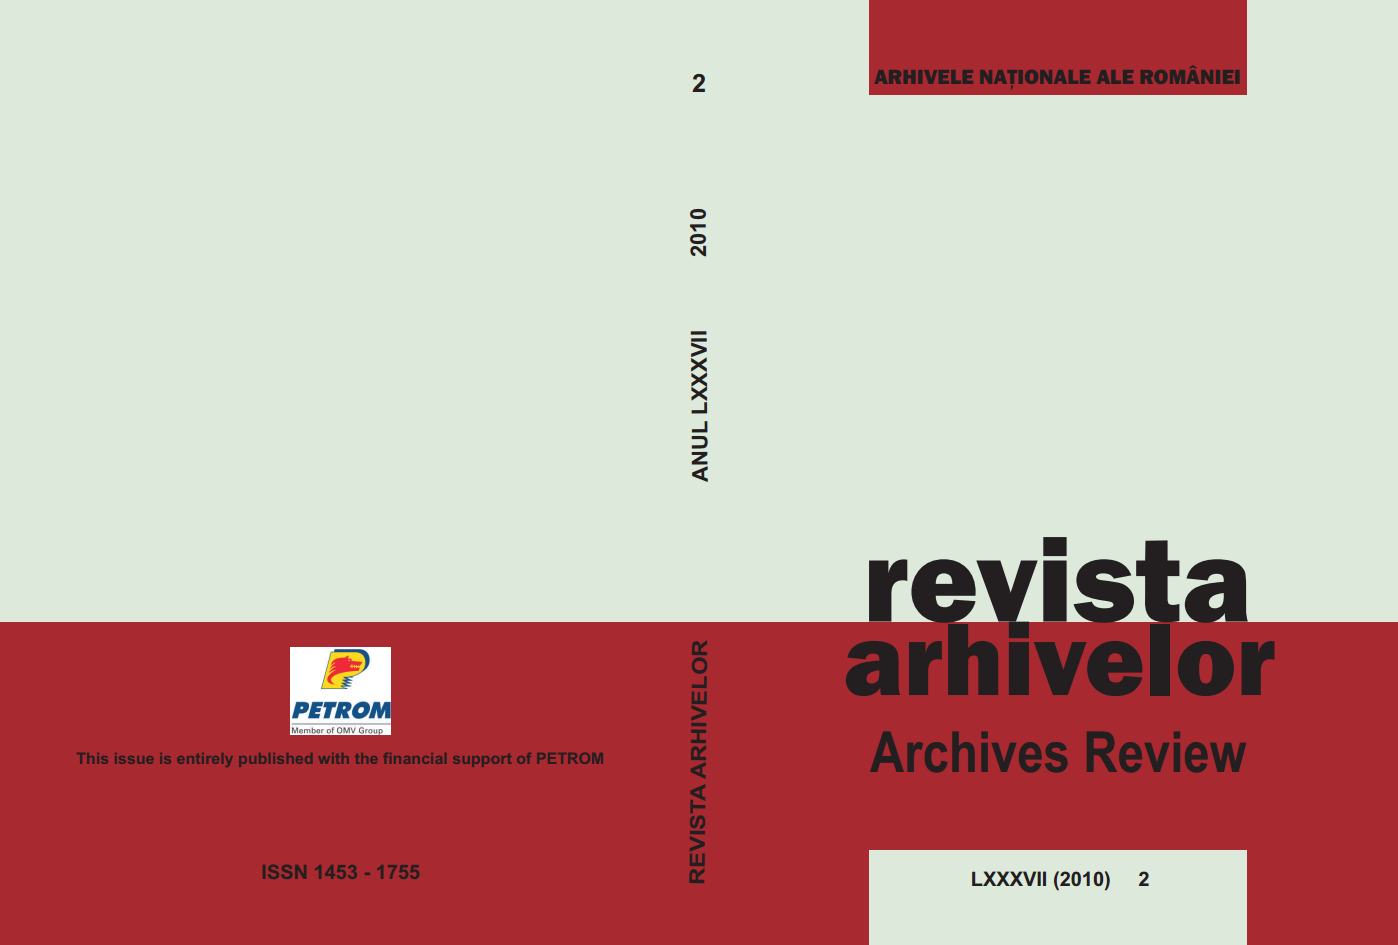 A Short Review over the Evacuation of the Administrative Archives of Caliacra and Durostor Counties Following the Cession of Southern Dobrudja in 1940 Cover Image